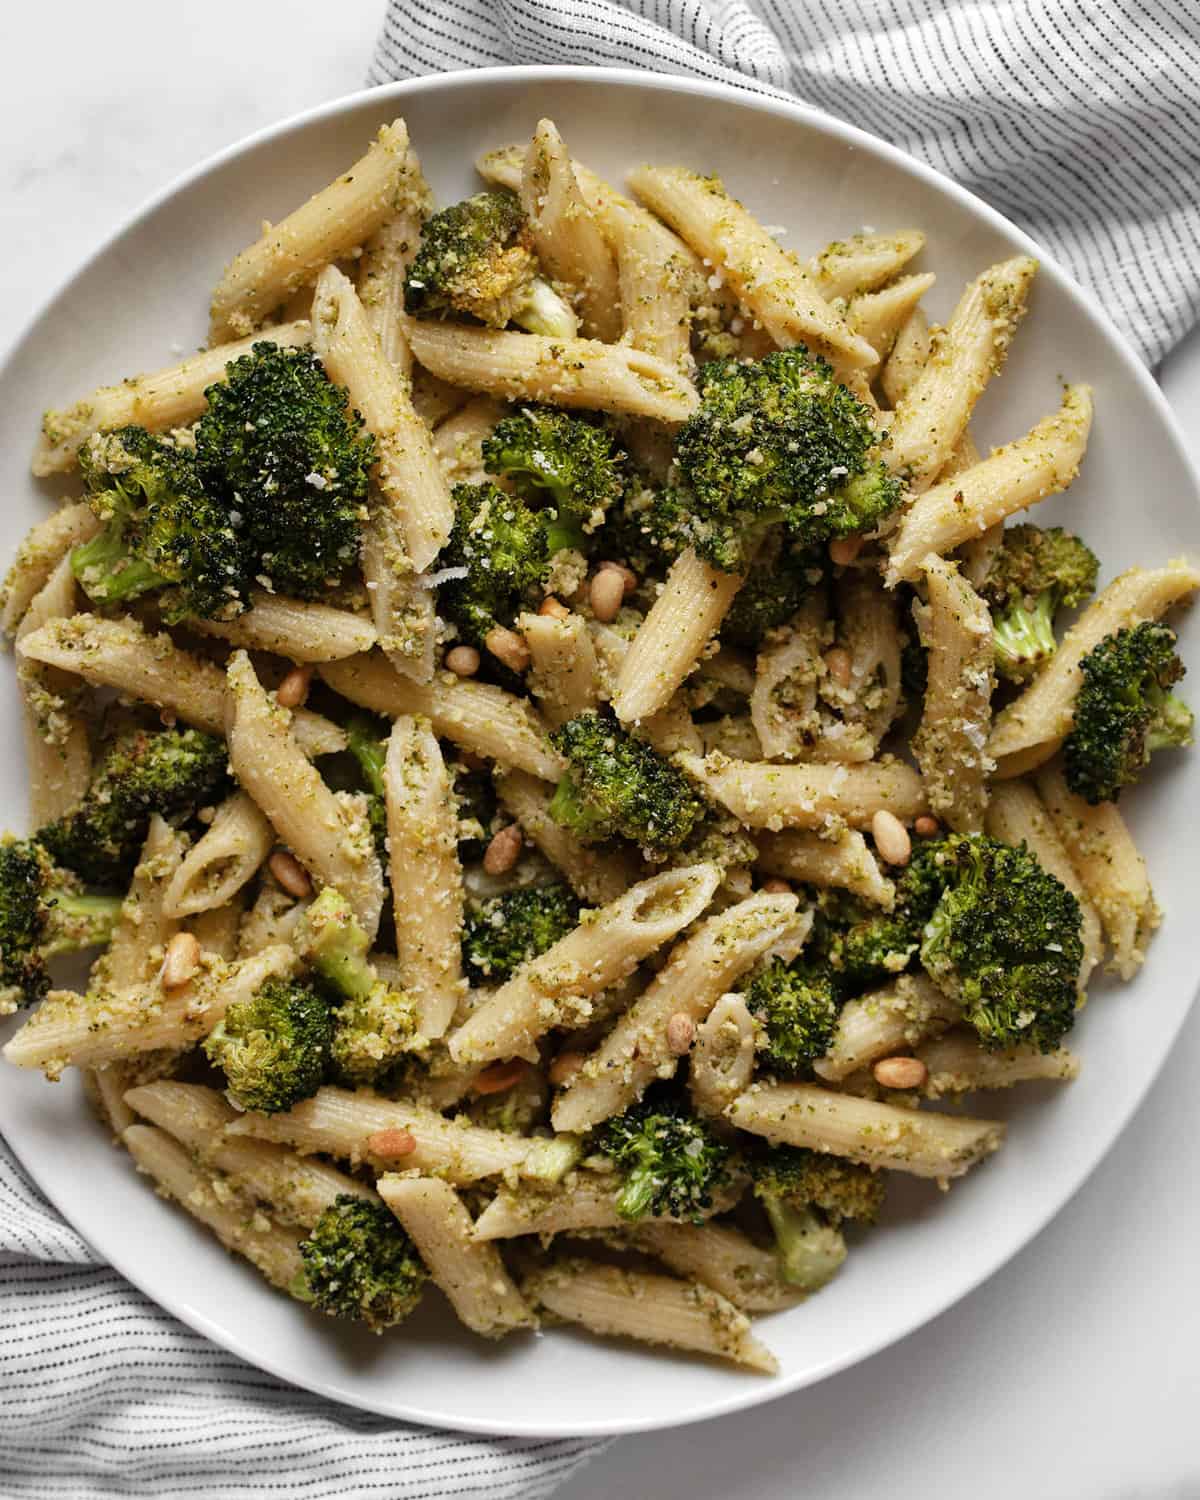 Roasted broccoli pasta on a plate.